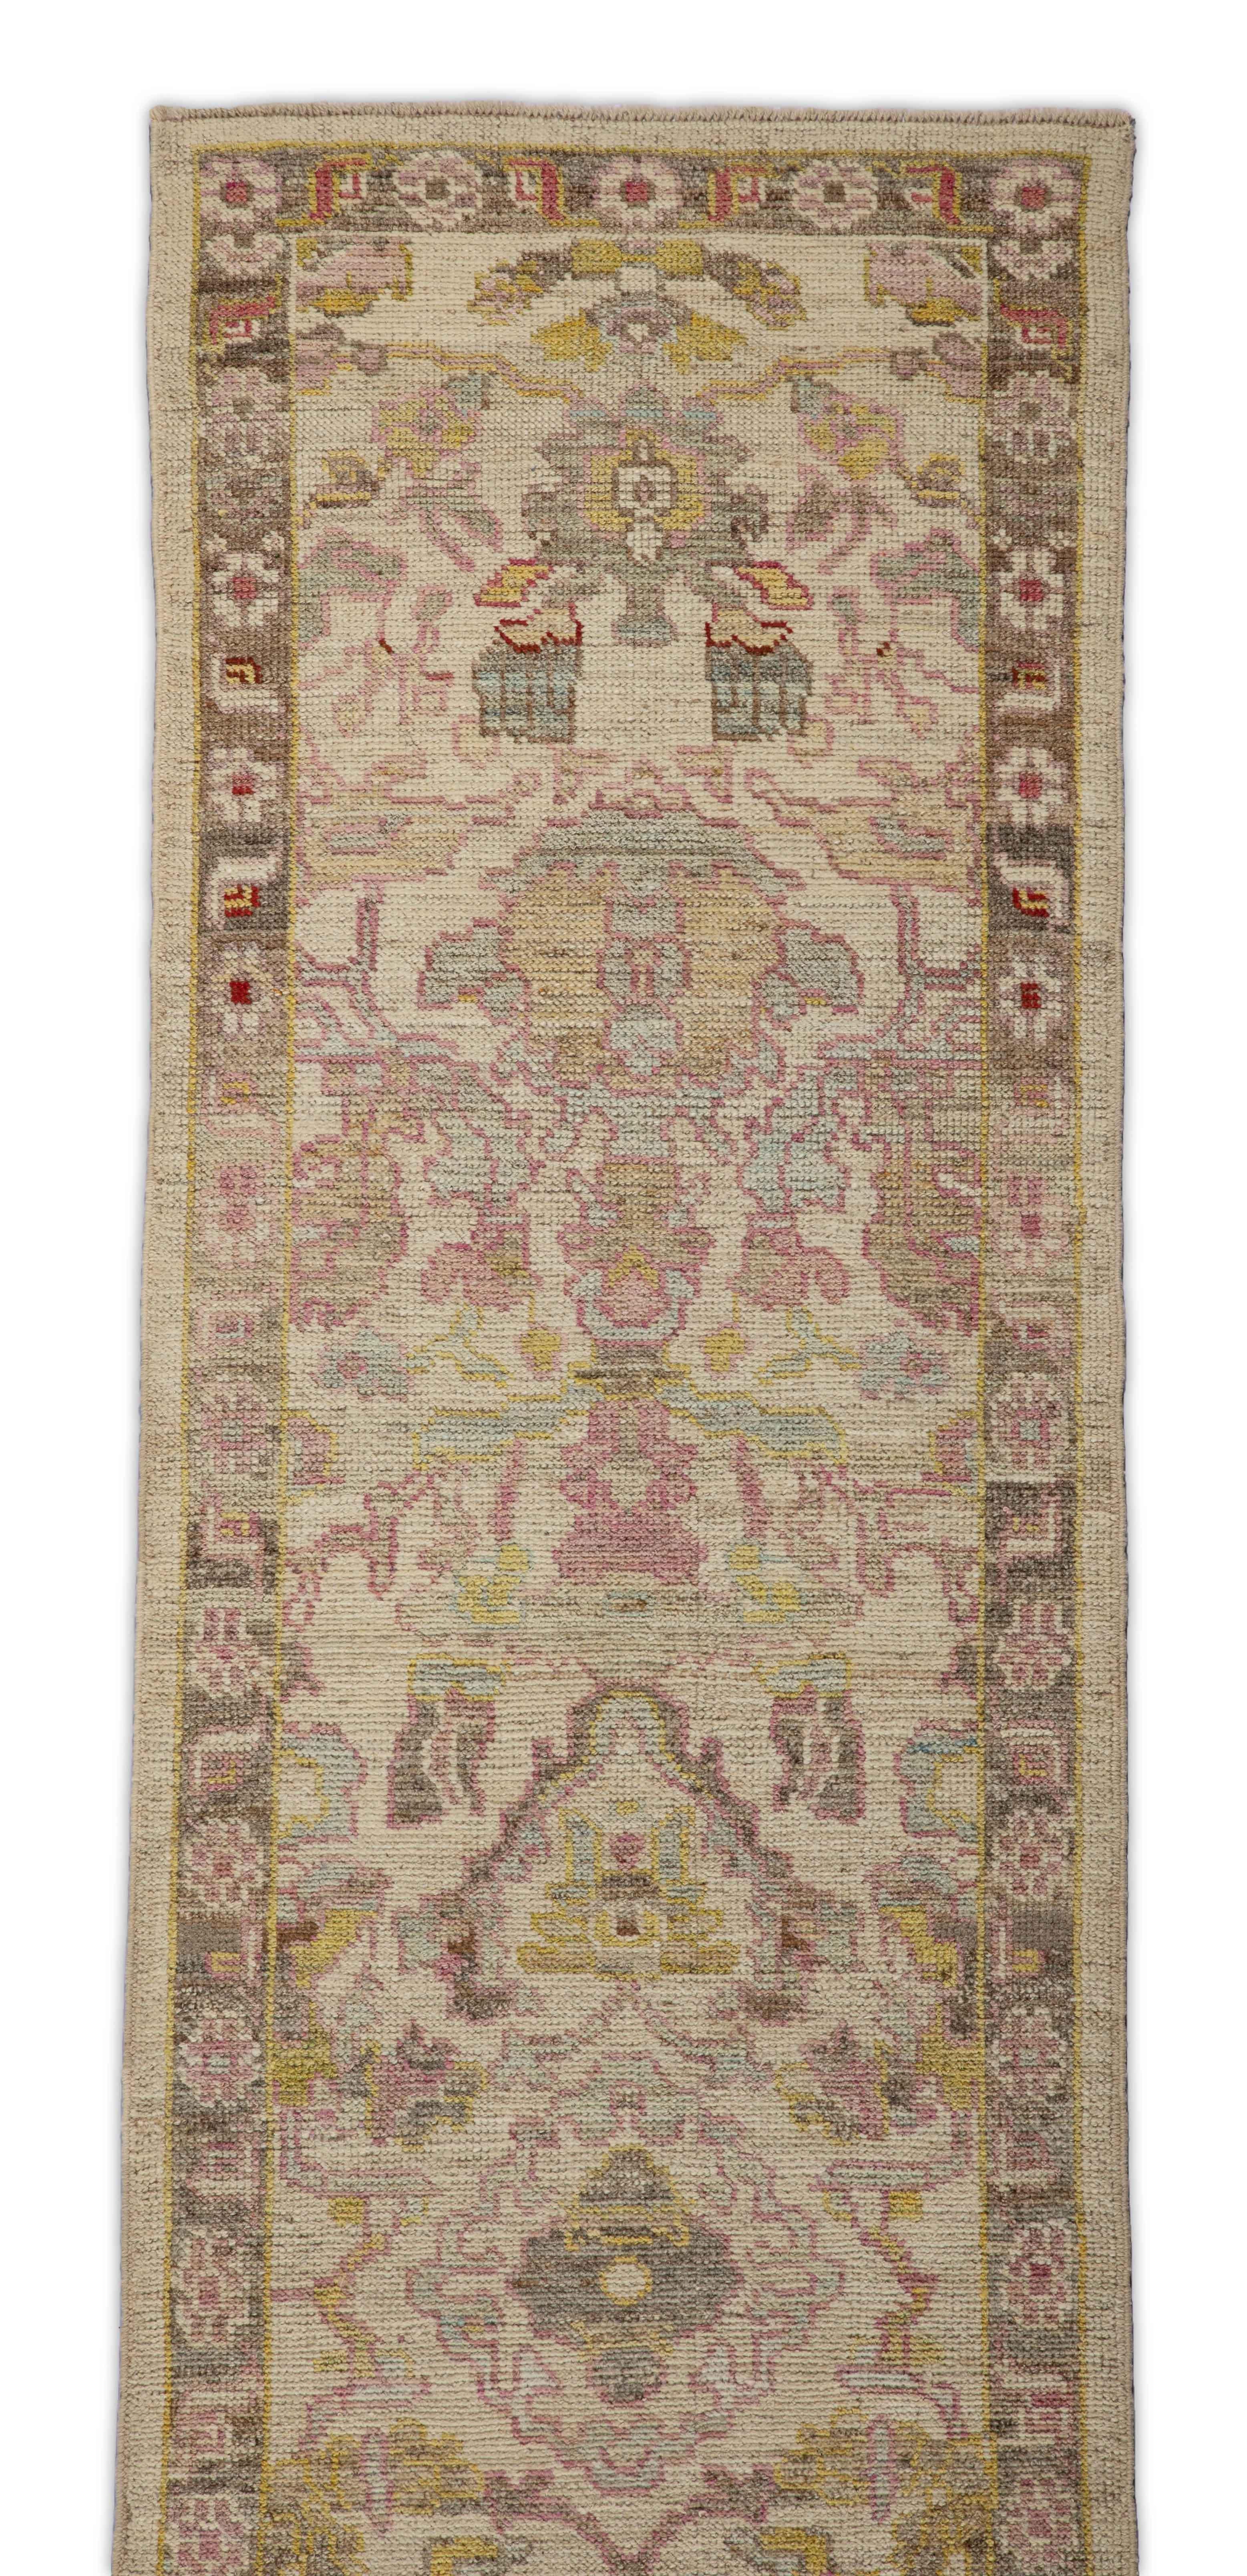 Hand-Woven Contemporary Oushak Runner Rug from Turkey with Brown and Pink Floral Patterns For Sale